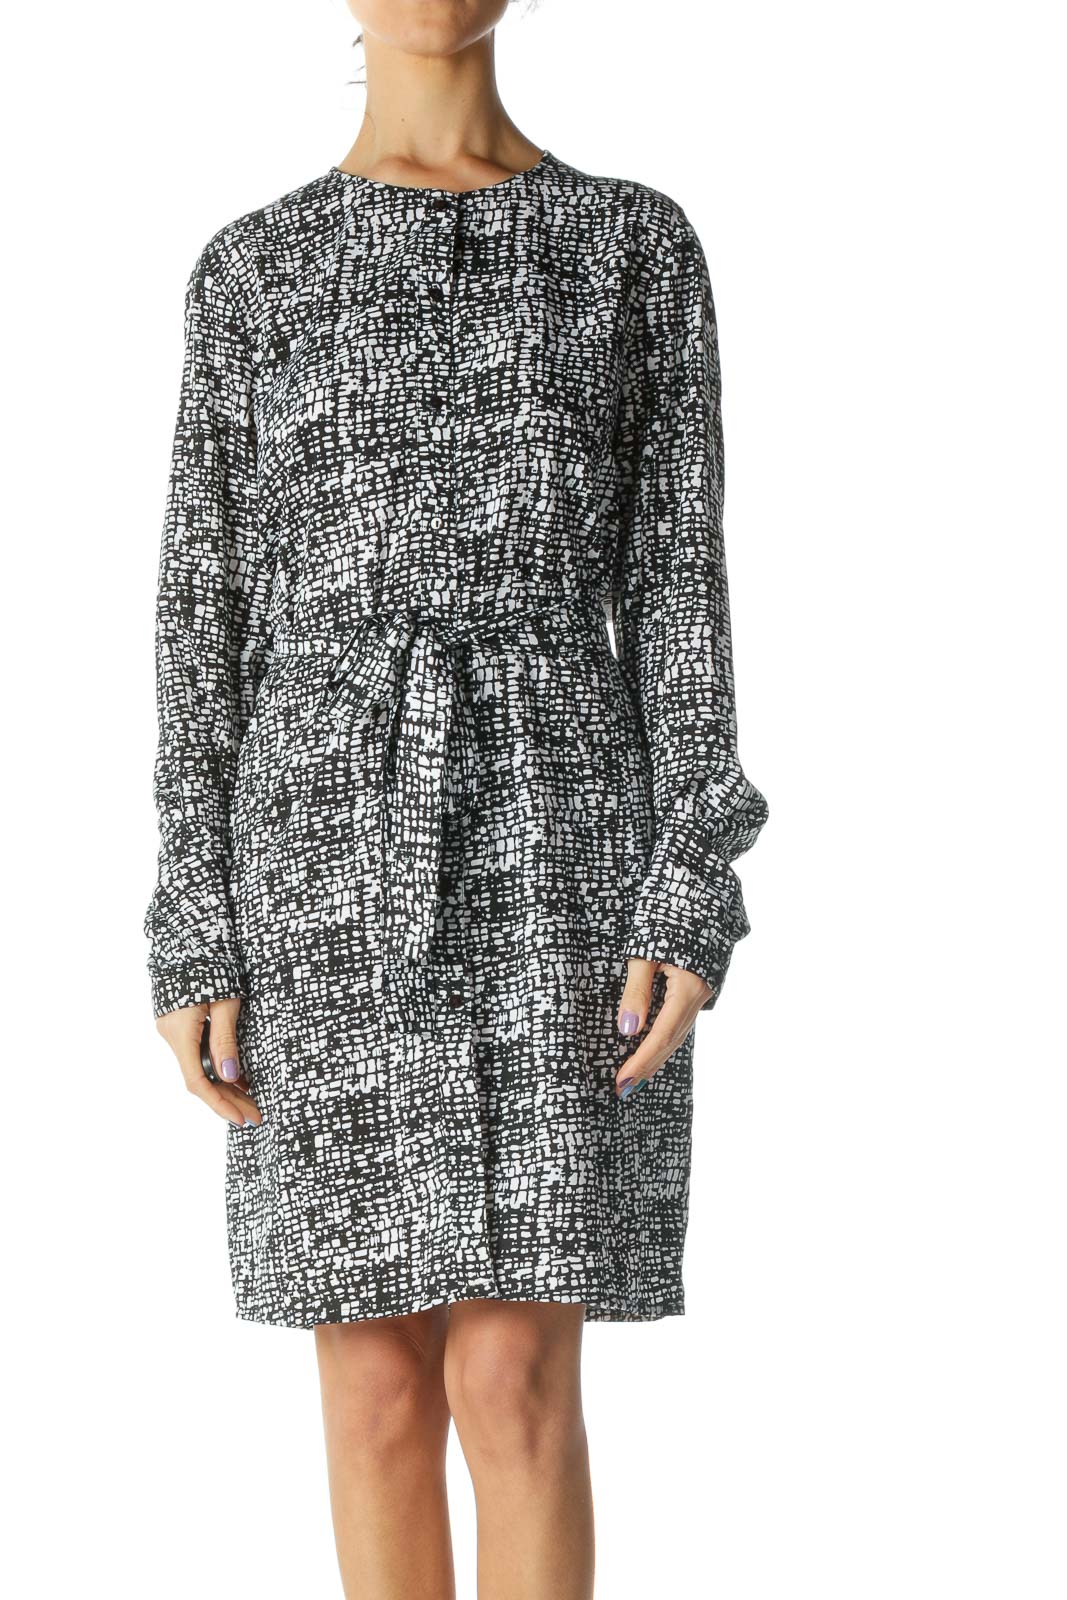 Black and White Printed Belted Long Sleeve Day Dress Front